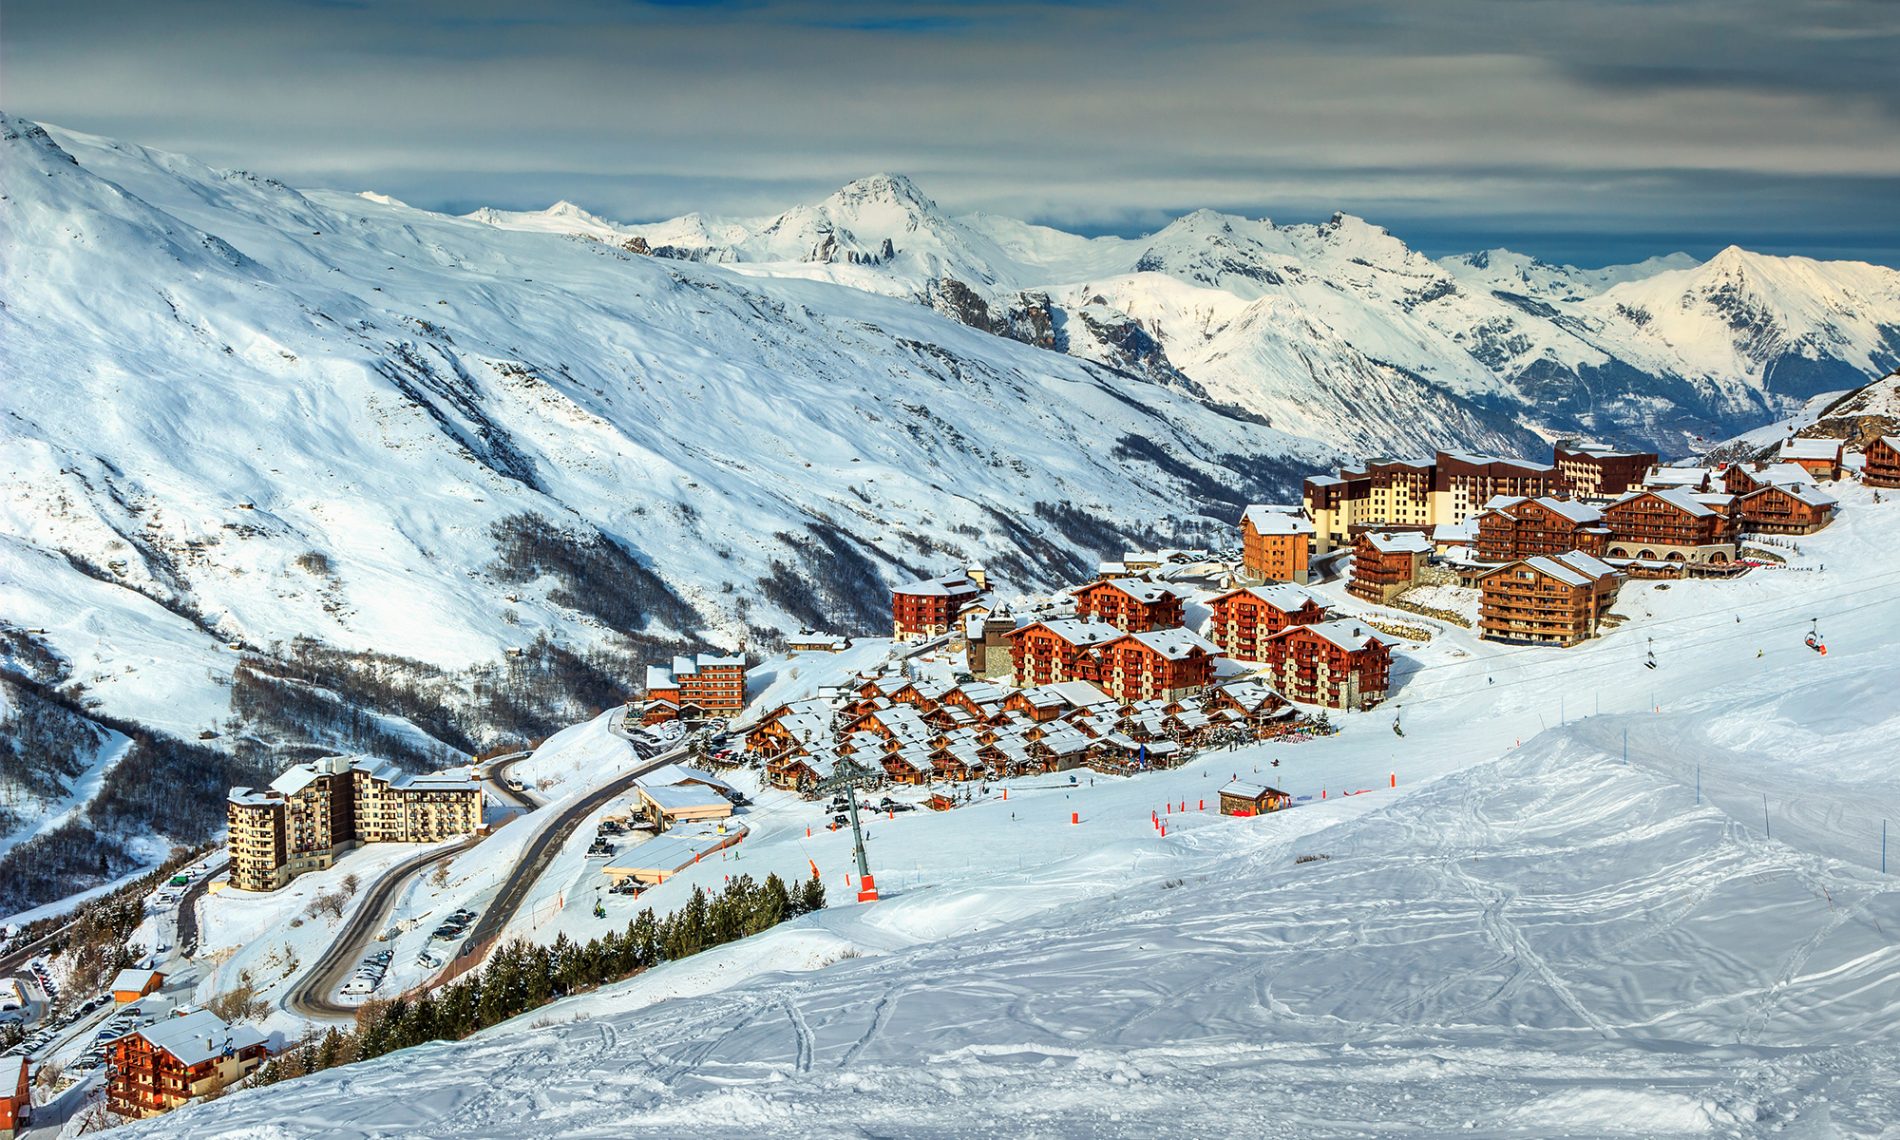 Les 3 Vallées in France. What Will Happen to the English Consumers of the French Mountains after March 29?